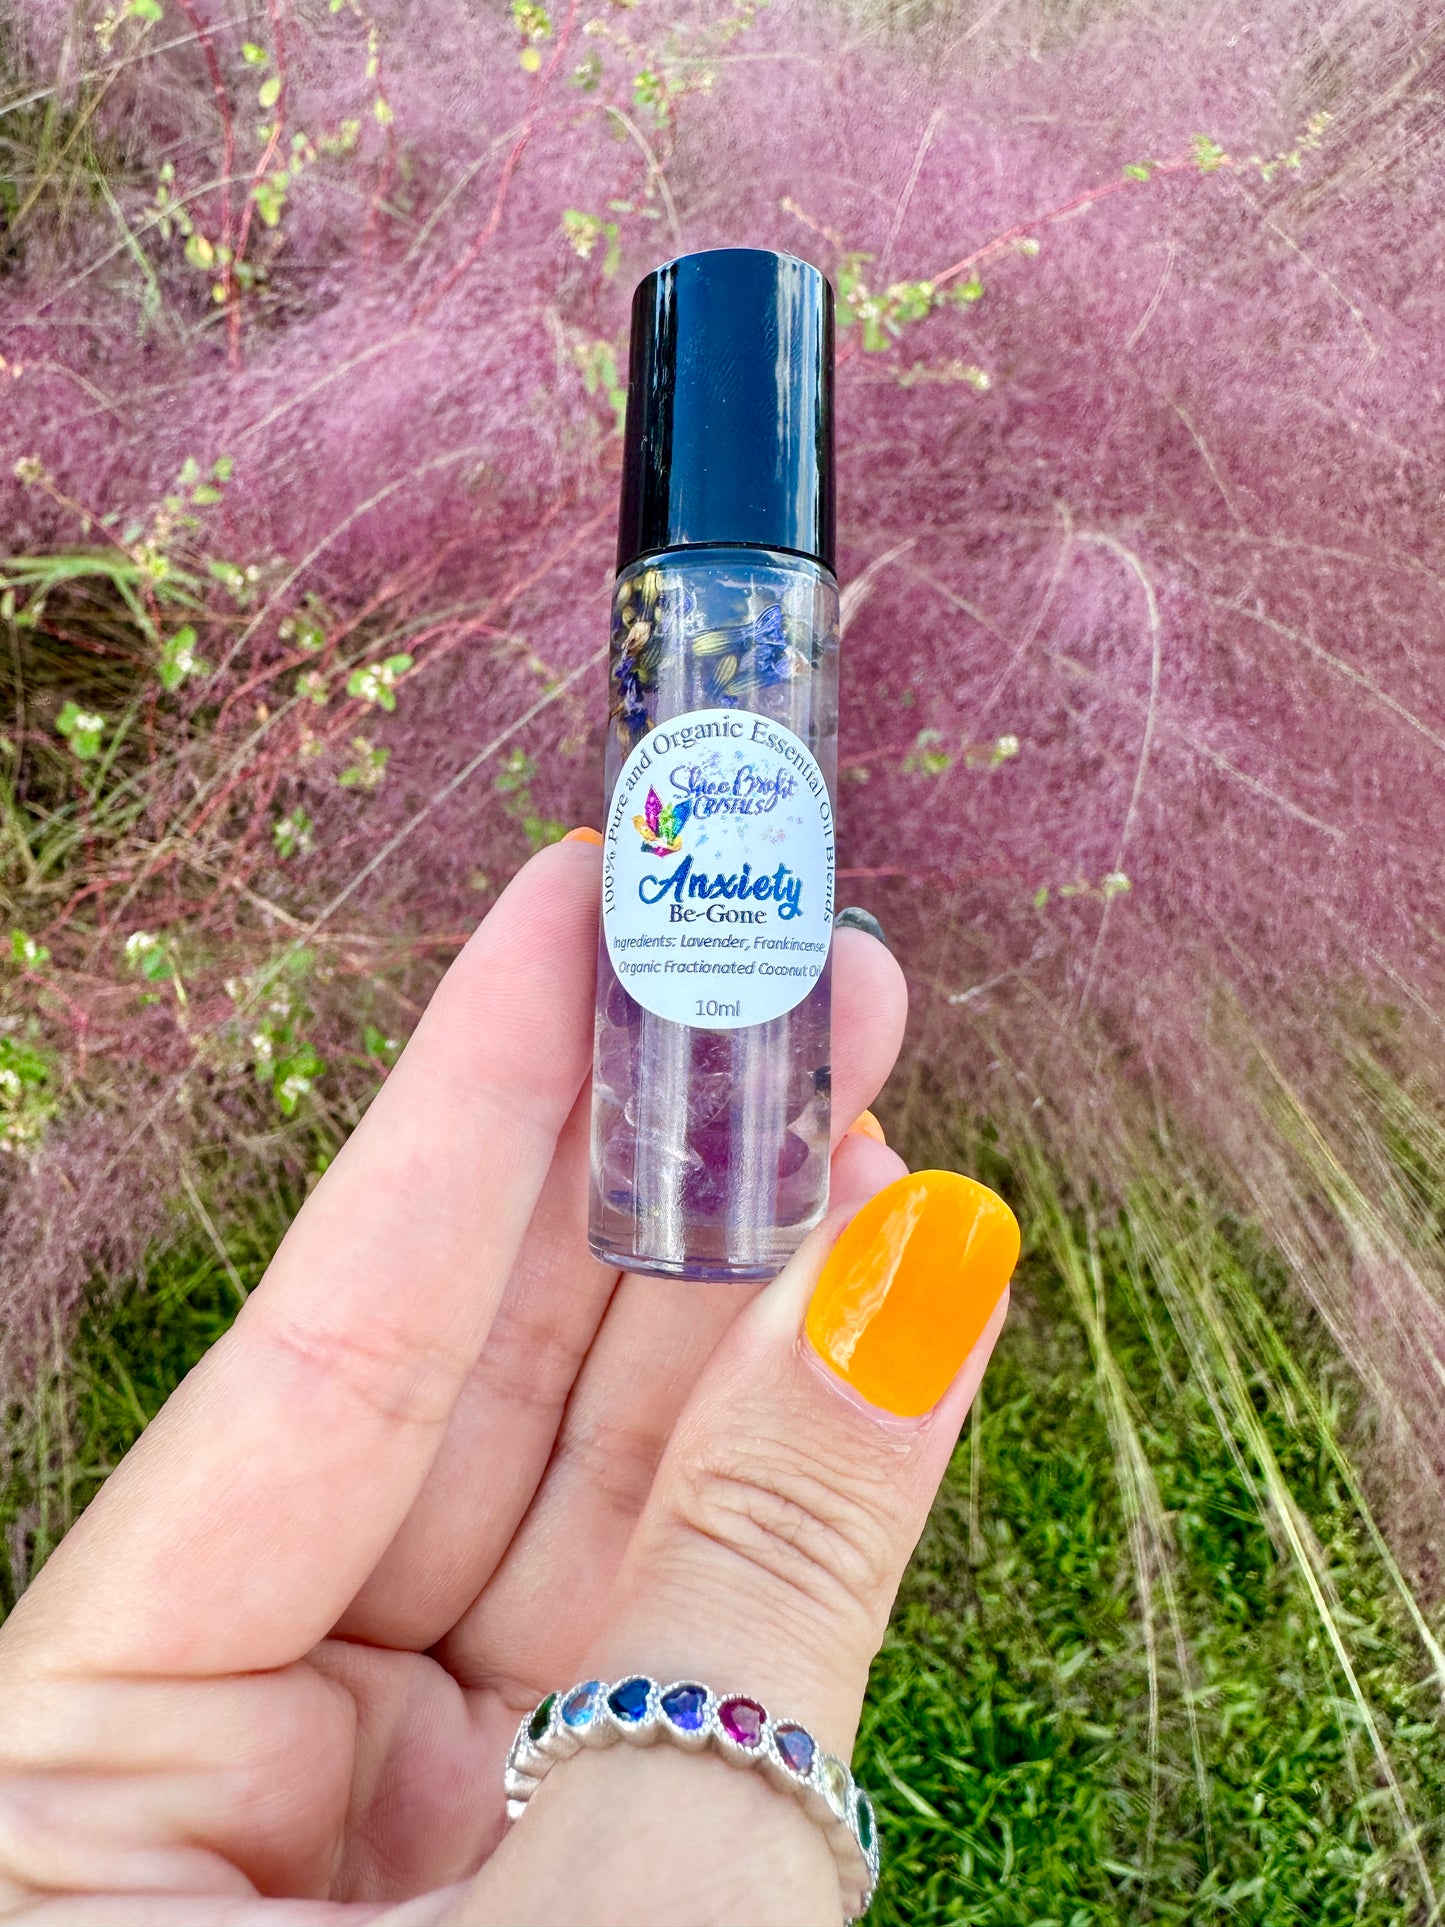 Anxiety Be Gone: Crystal-Infused Lavender Essential Oil Roller - Natural Perfume for Anxiety & Stress Relief, A Calming Blend for Peace and Tranquility